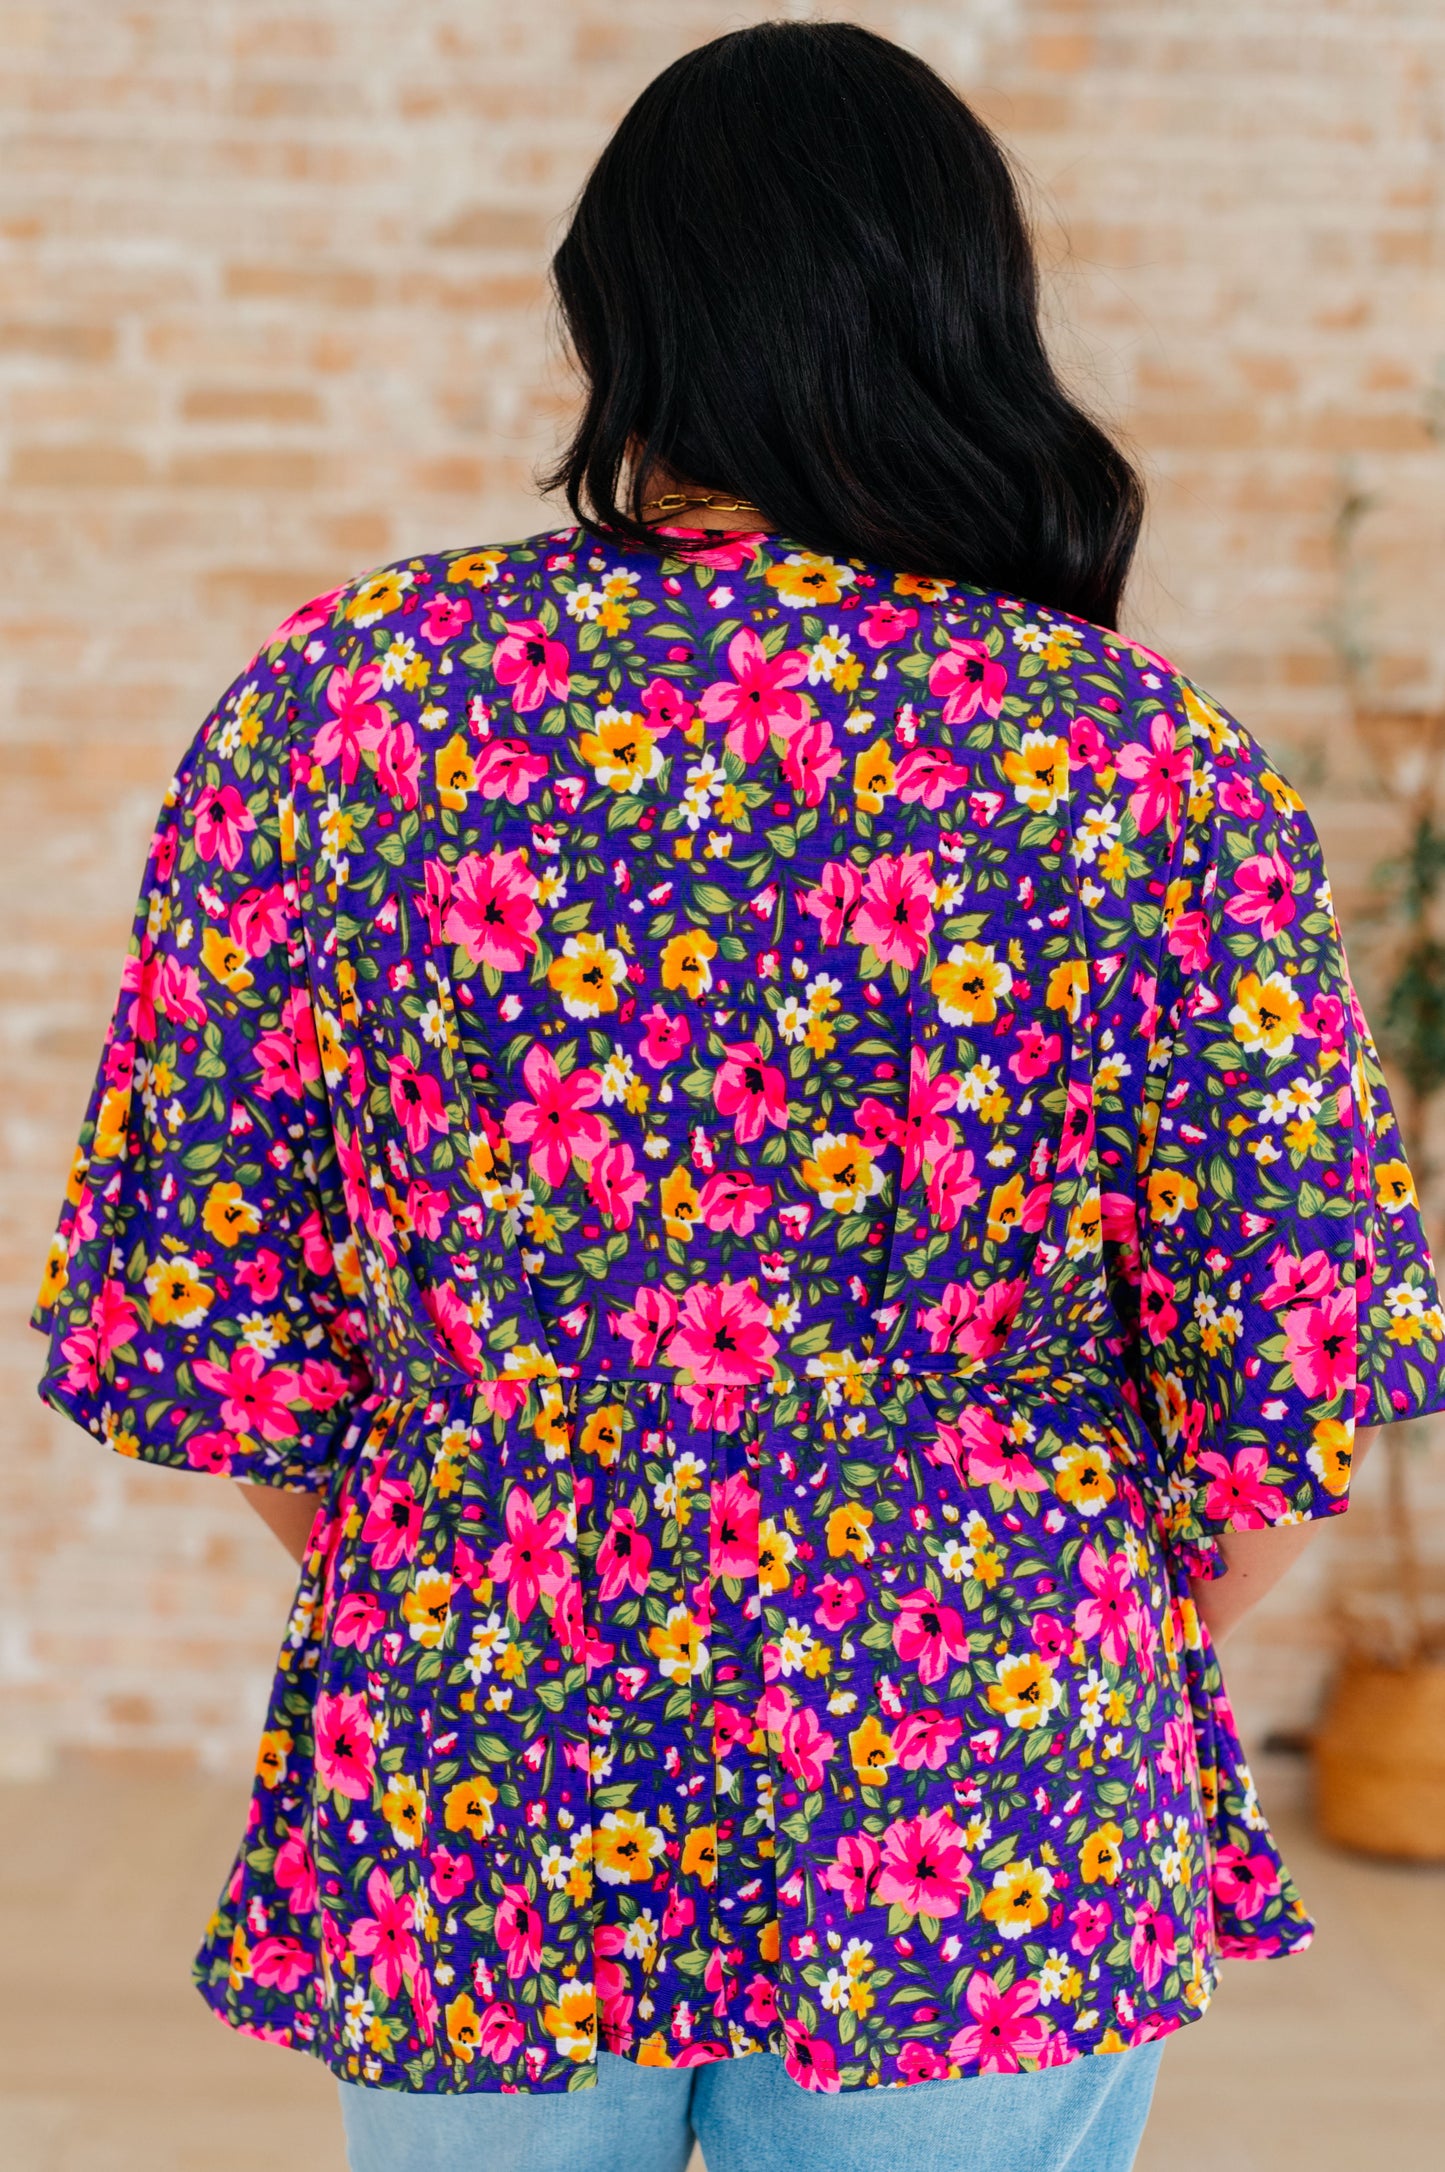 Dreamer Peplum Top in Purple and Pink Floral (Online Exclusive)